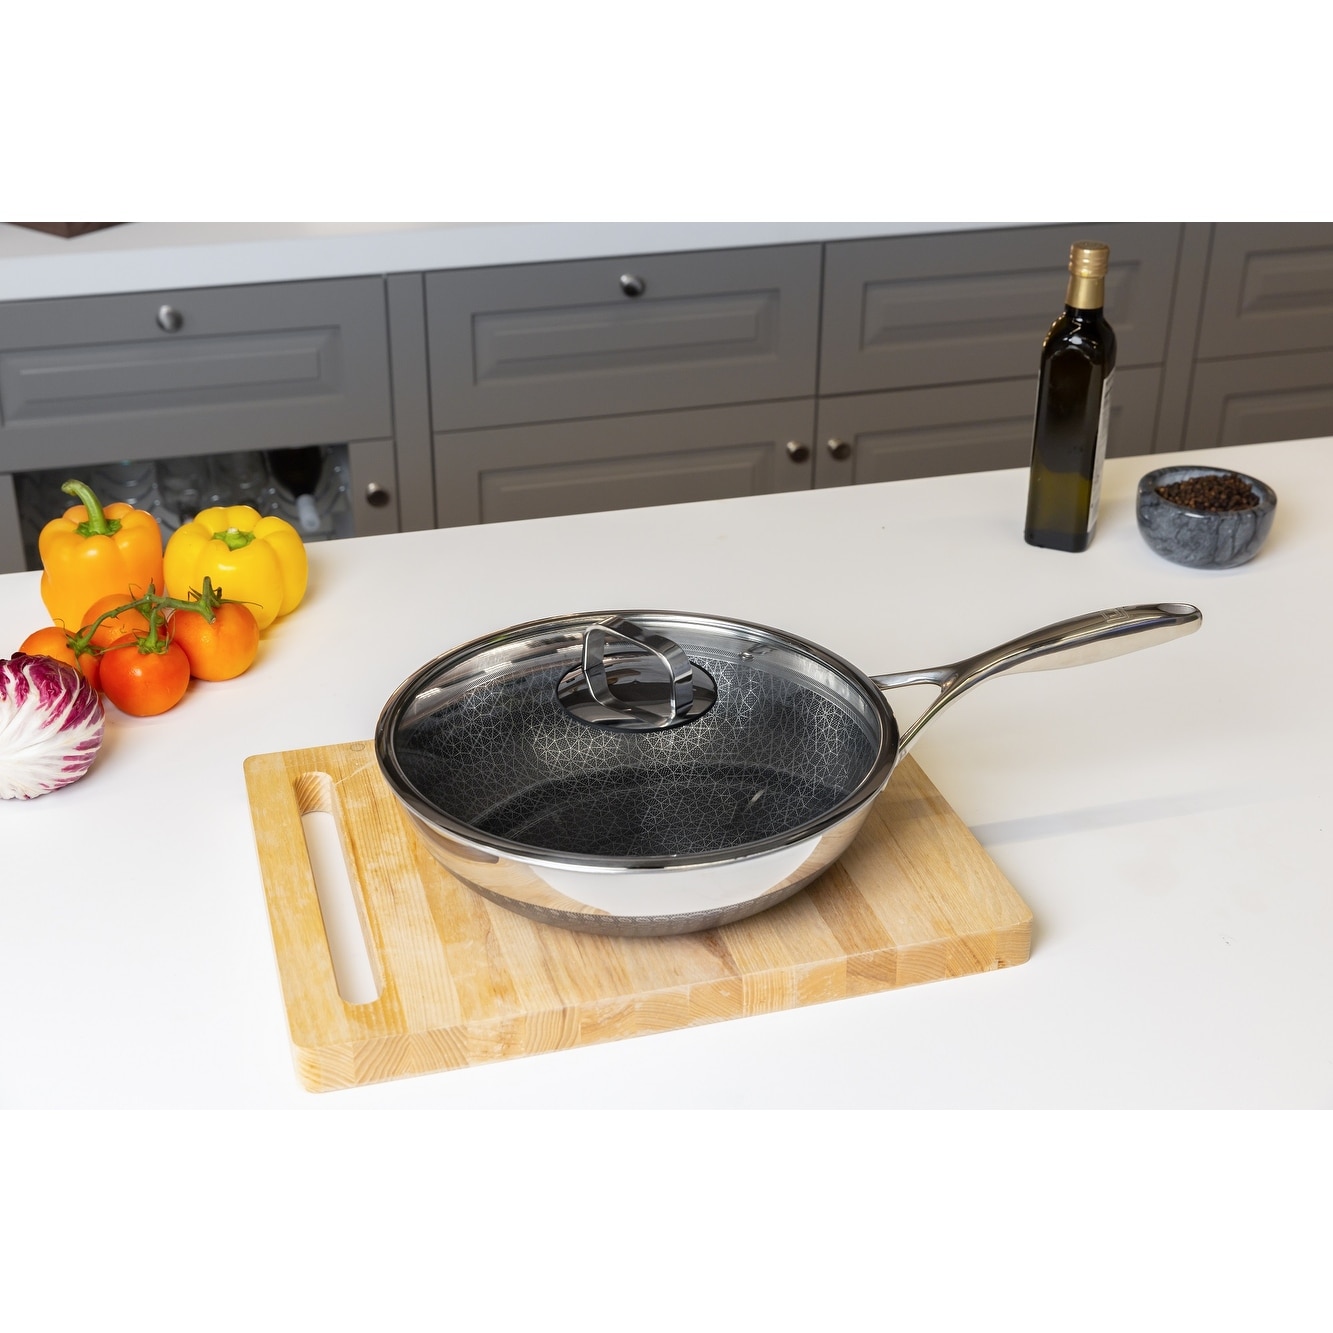 https://ak1.ostkcdn.com/images/products/is/images/direct/2dae65111c7de1b0e834b5c74af857ad00bd0c28/DiamondClad-by-Livwell-12%22-Hybrid-Nonstick-Wok-Set-with-Tempered-Glass-Lid%2C-Dishwasher-Safe%2C-Cool-Touch-Handle%2C-PFOA-free.jpg